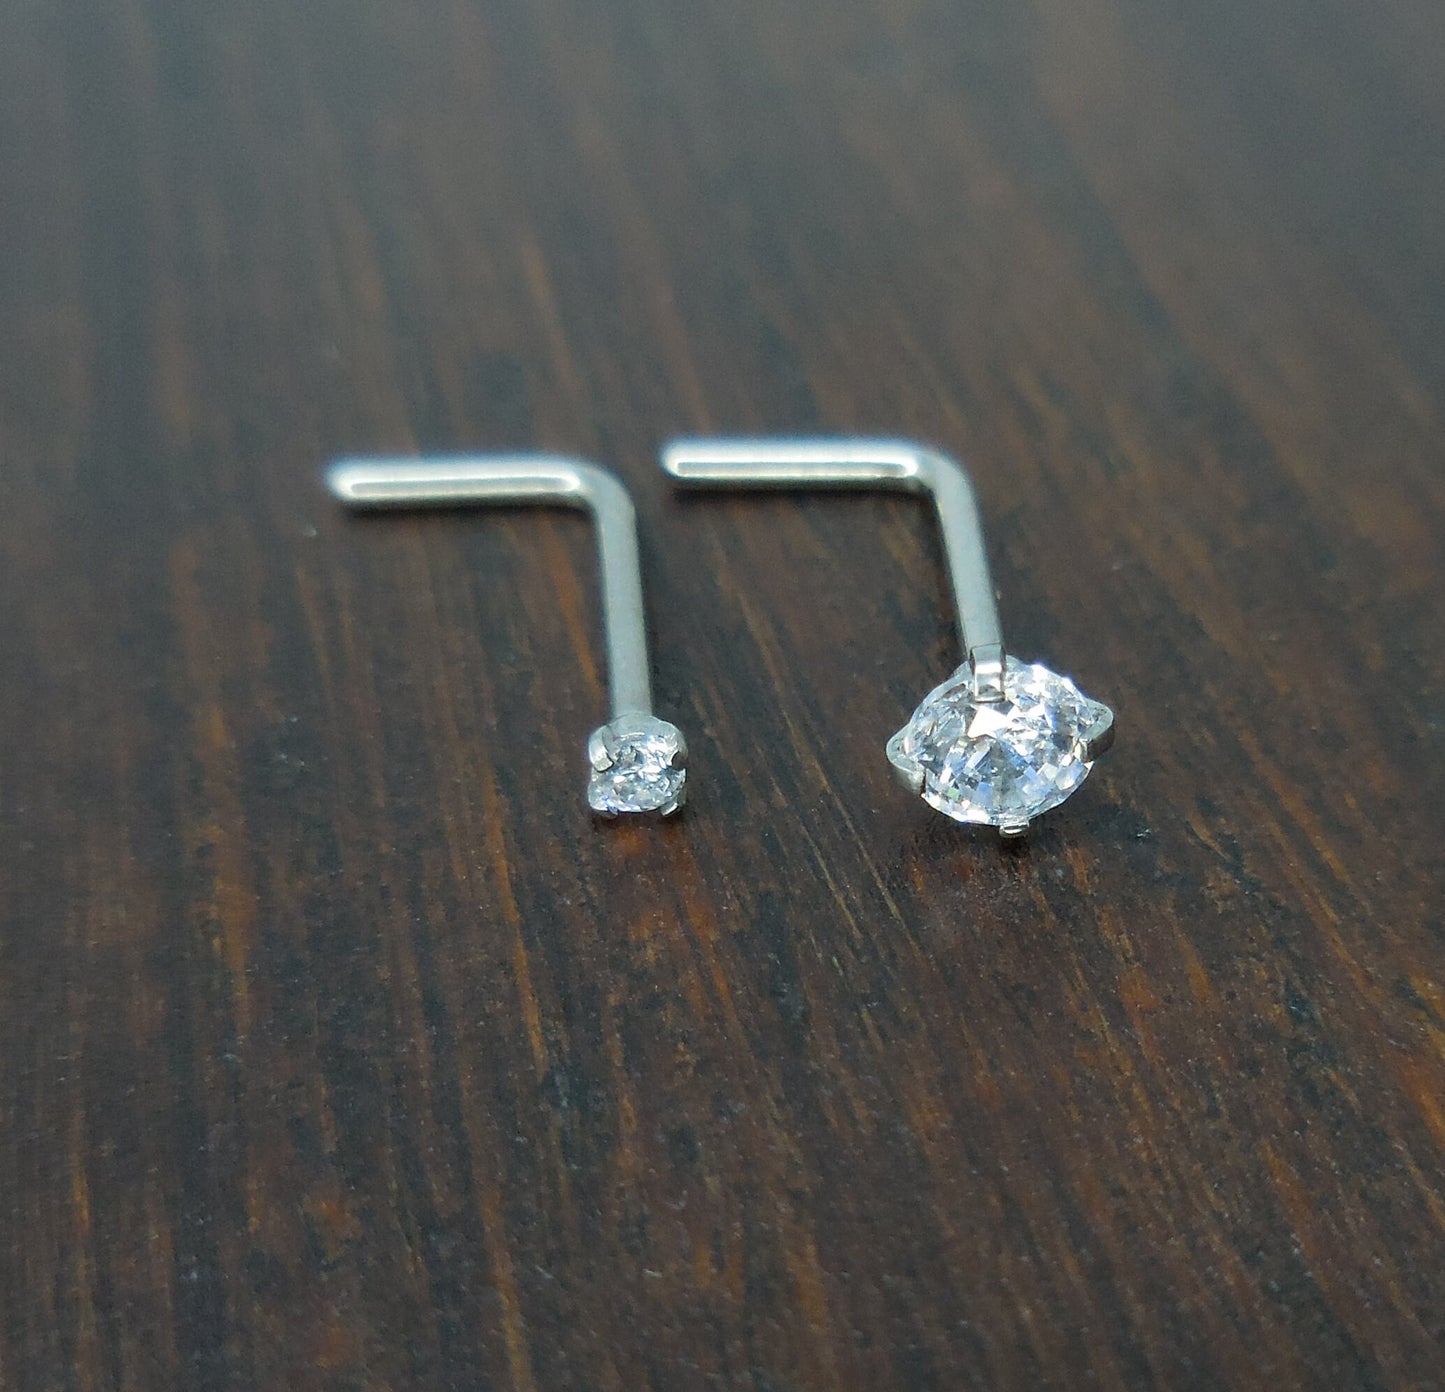 Solid Titanium Nose Rings Clear Cubic Zirconia 1.5mm 3mm Silver L Shape 20G 18G Bend Stud Ring Implant Grade